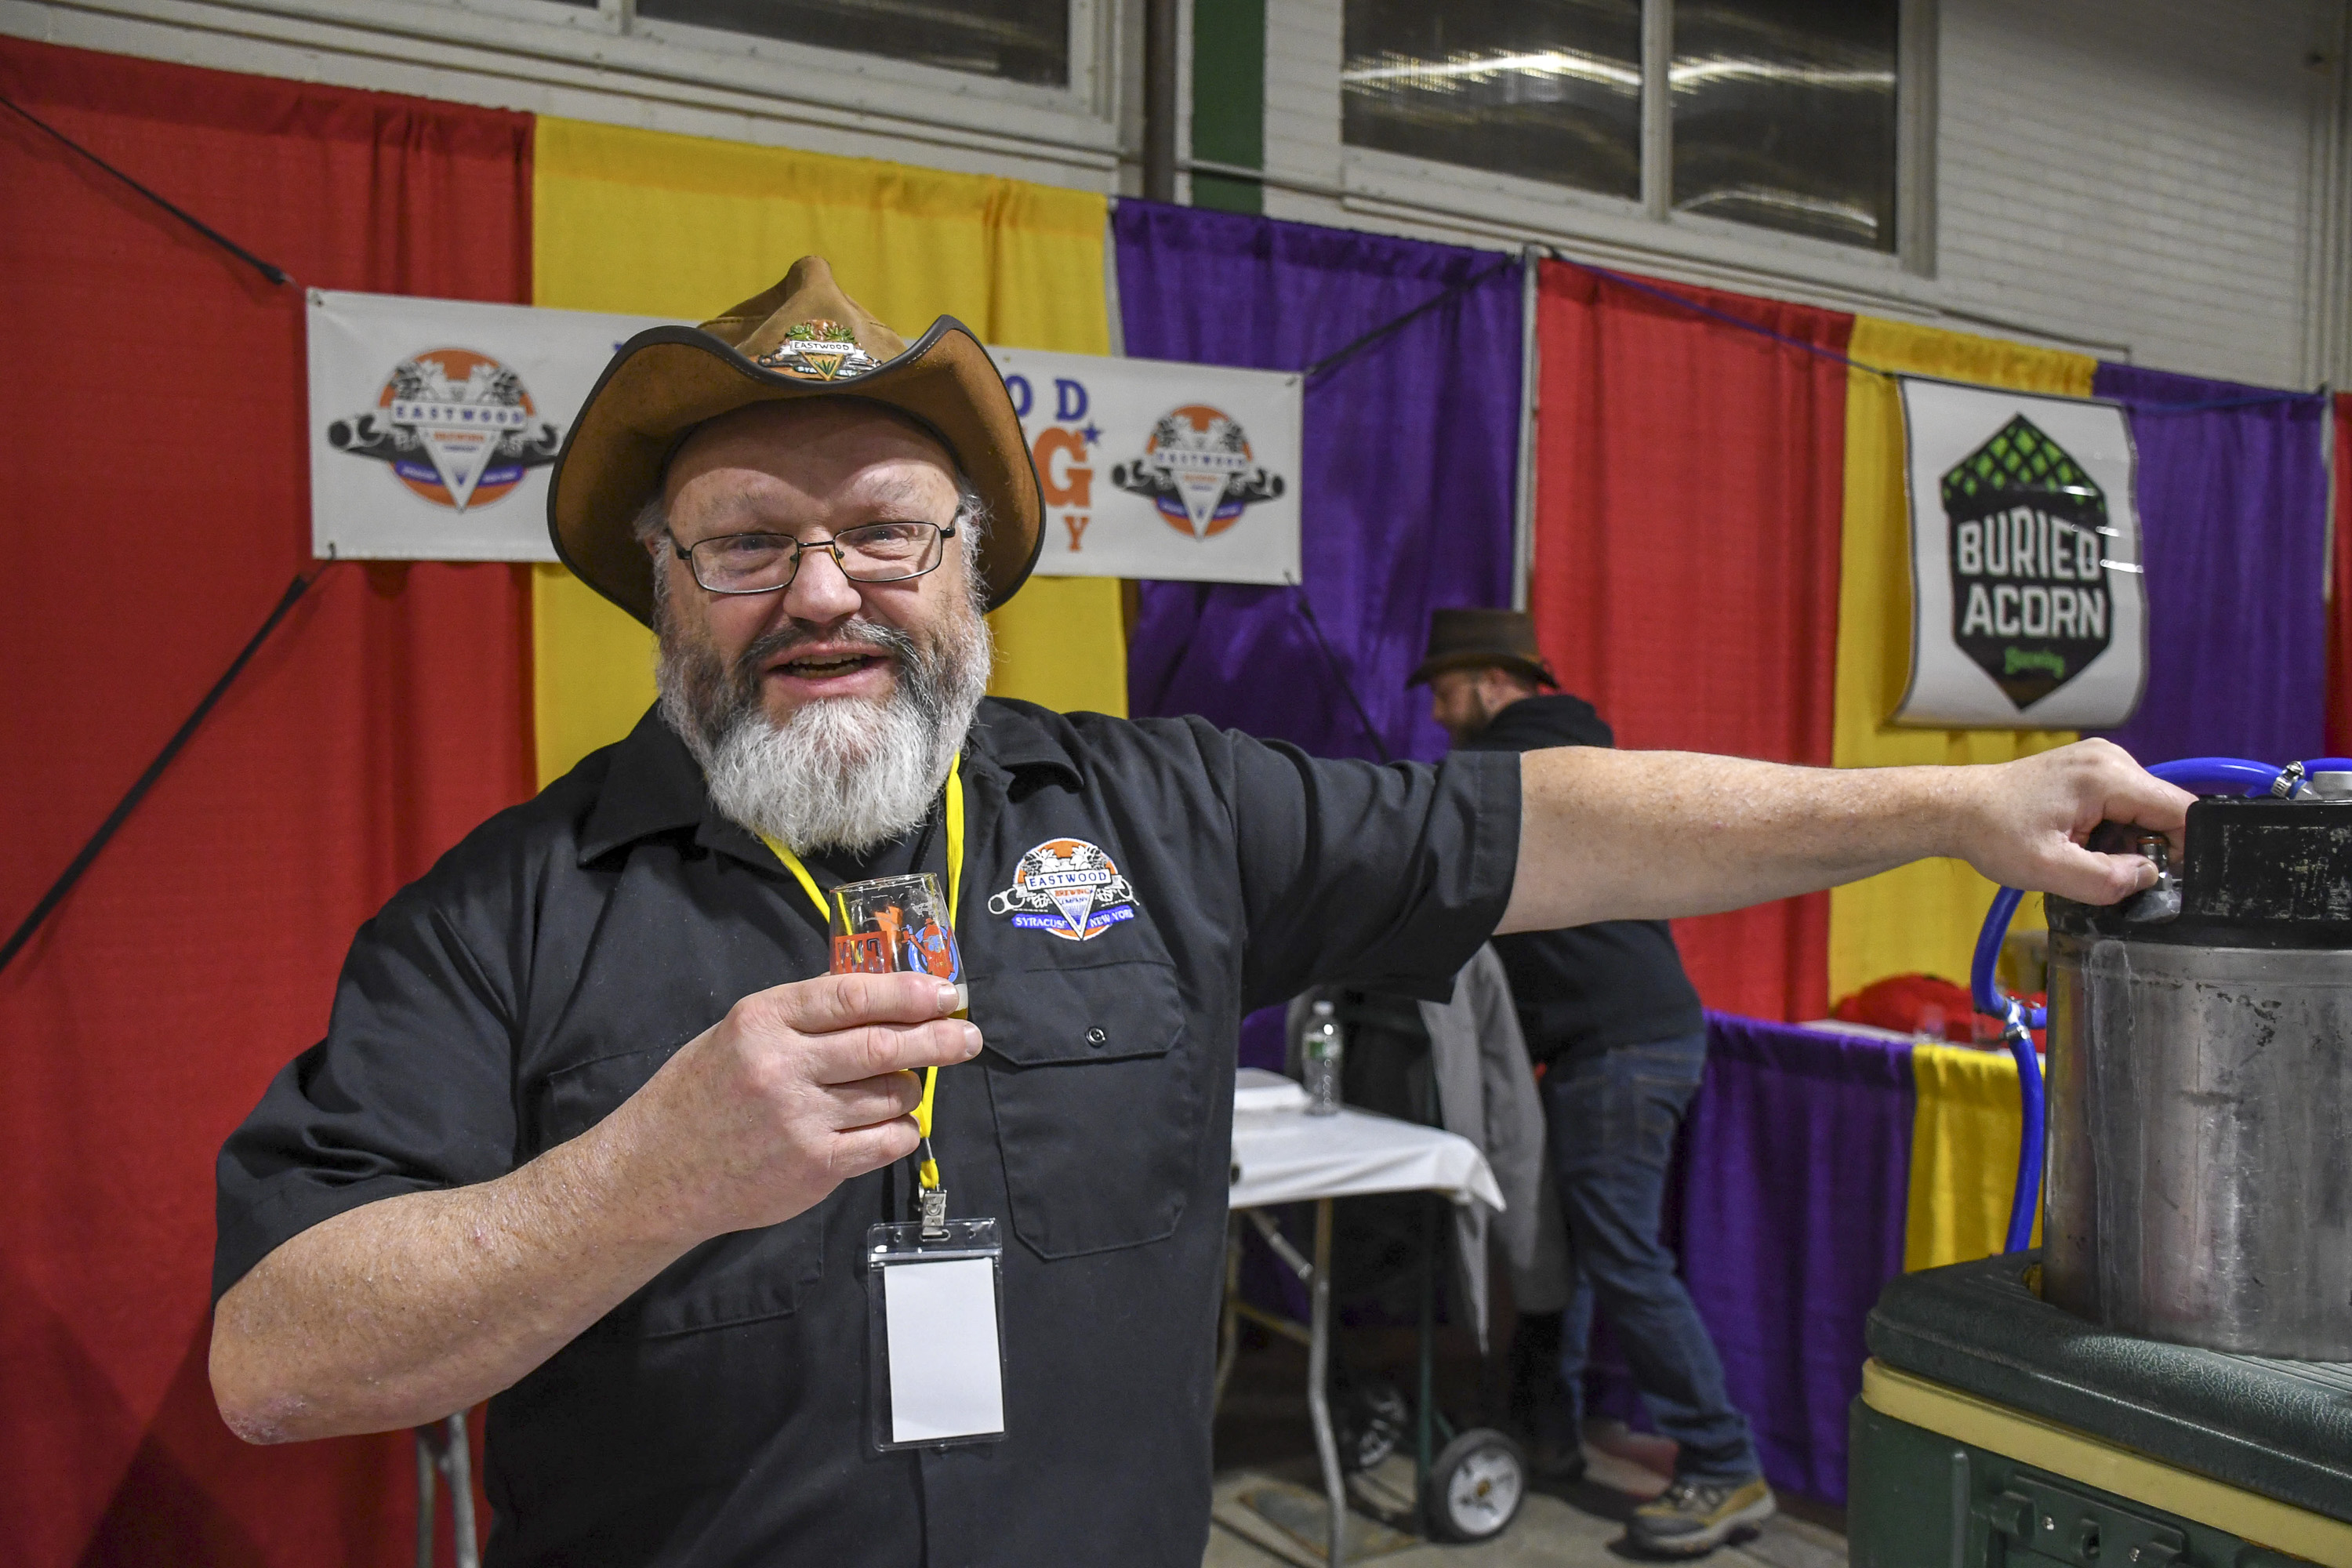 Pete Kirkgasser, owner of the Eastwood Brewing Company, has been setting up a booth like this one at the CNY Brewfest for over 20 years.